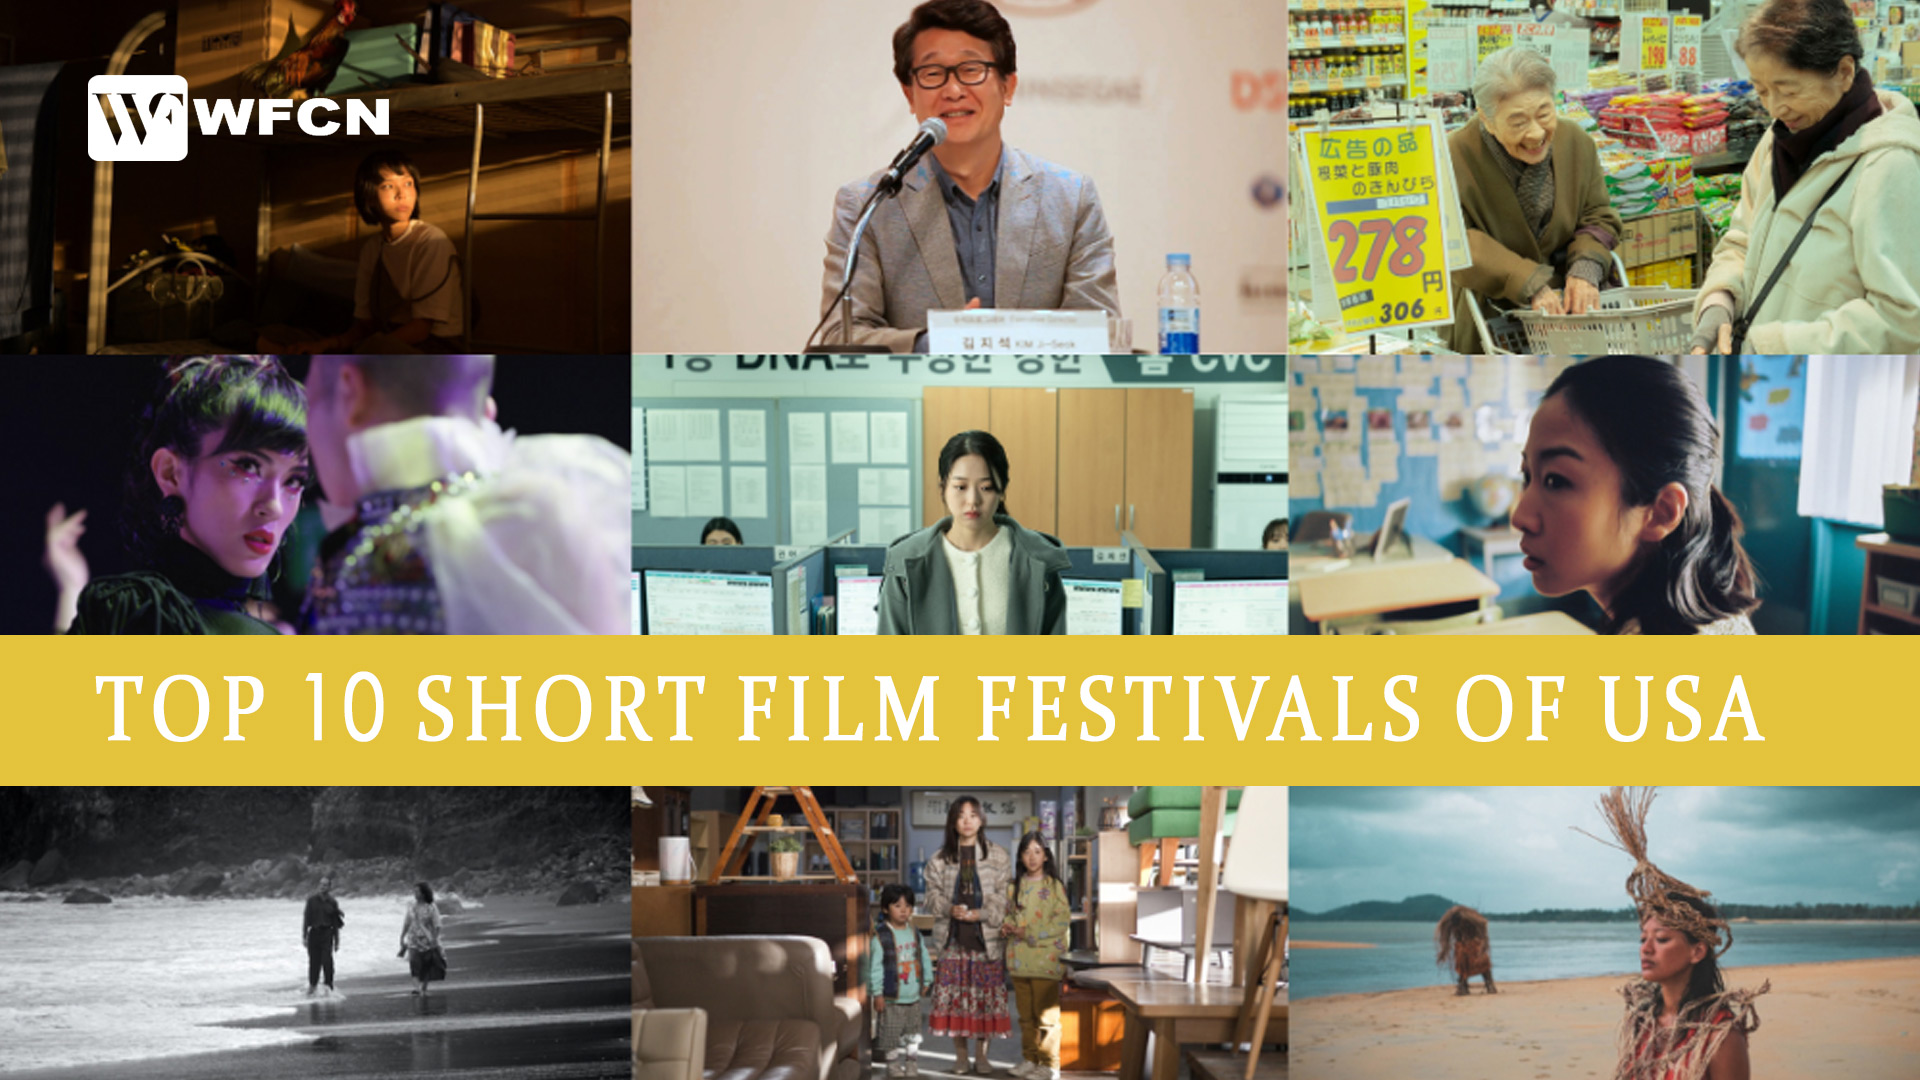 Top 10 Short Film Festivals in the USA